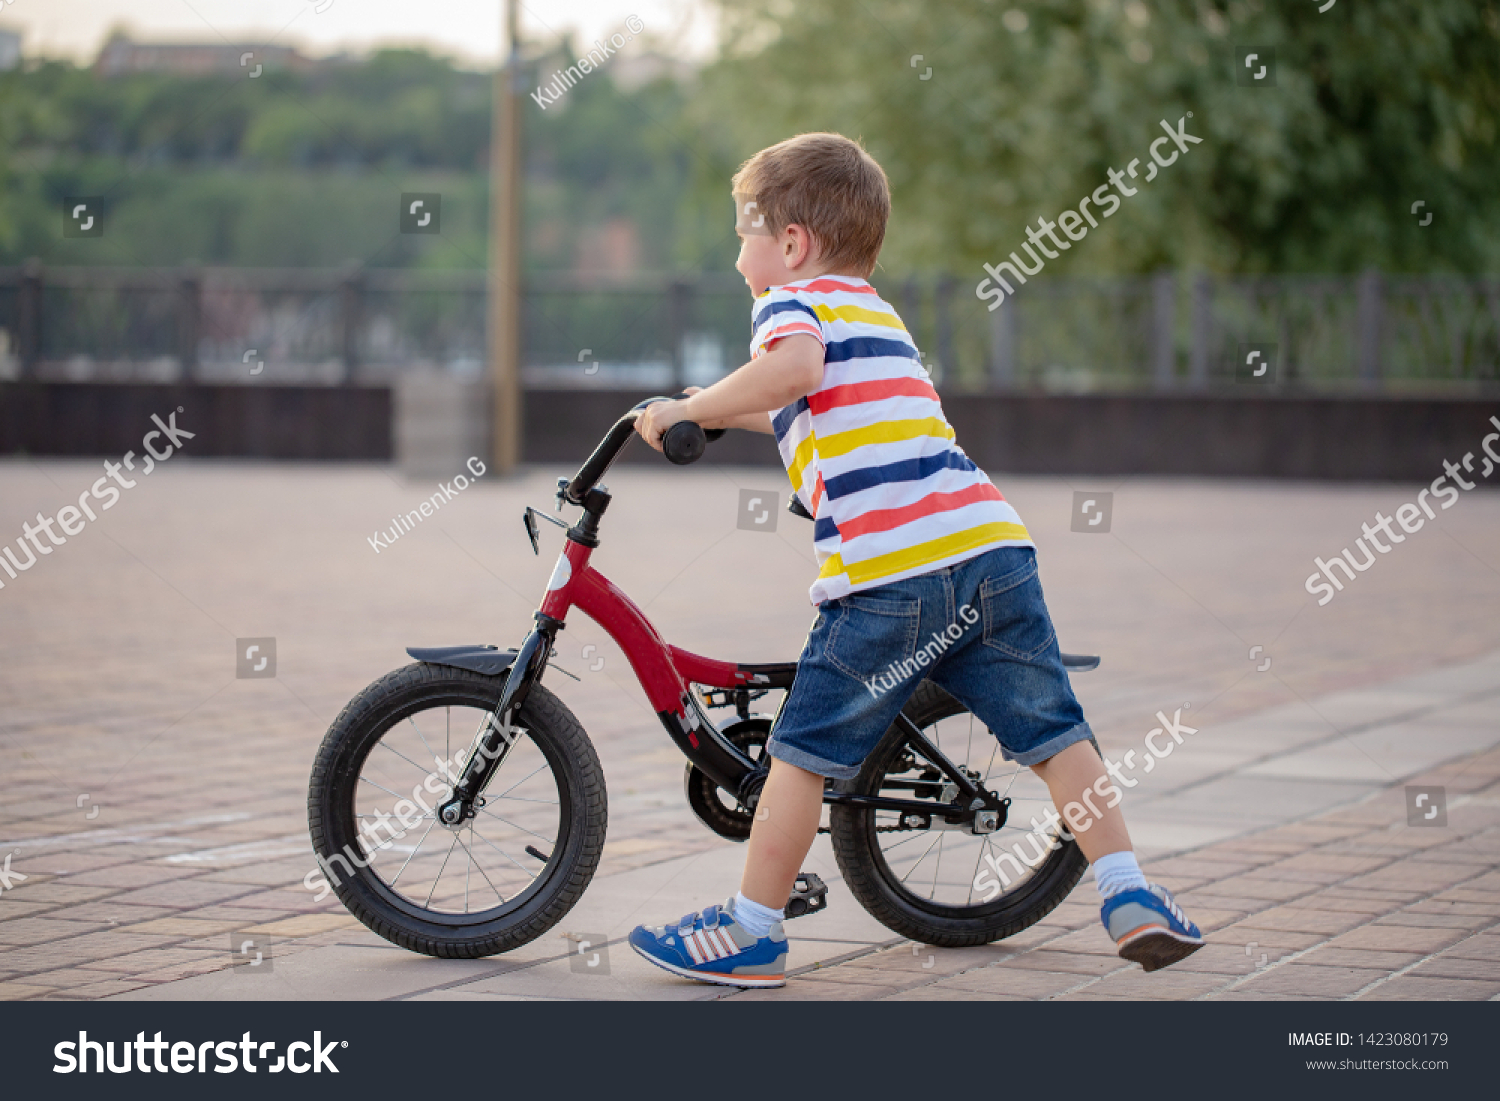 how to teach 5 year old to ride a bike